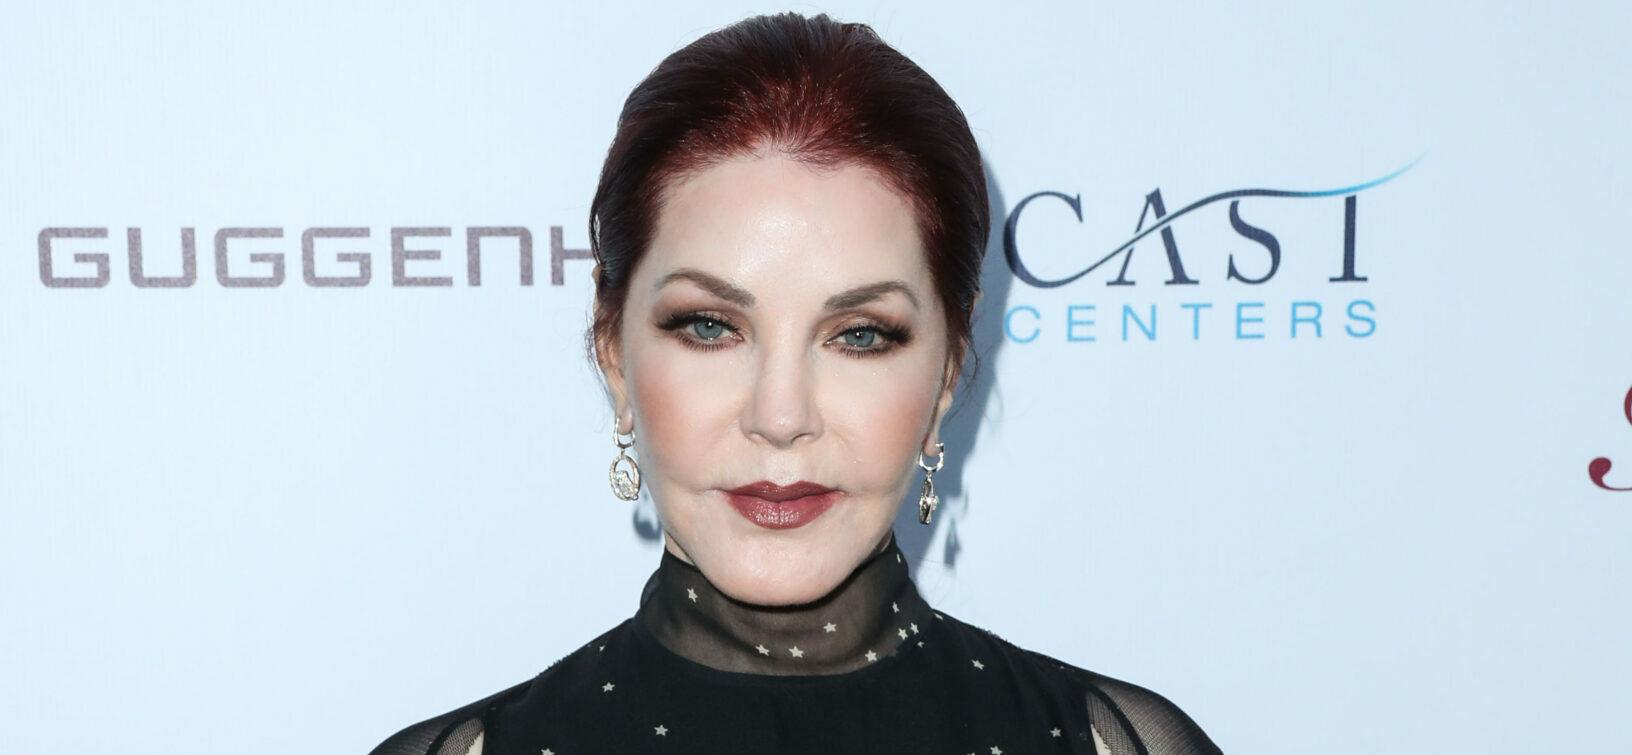 Priscilla Presley Reveals The REAL Reason Why She Didn’t Remarry After Elvis Presley!